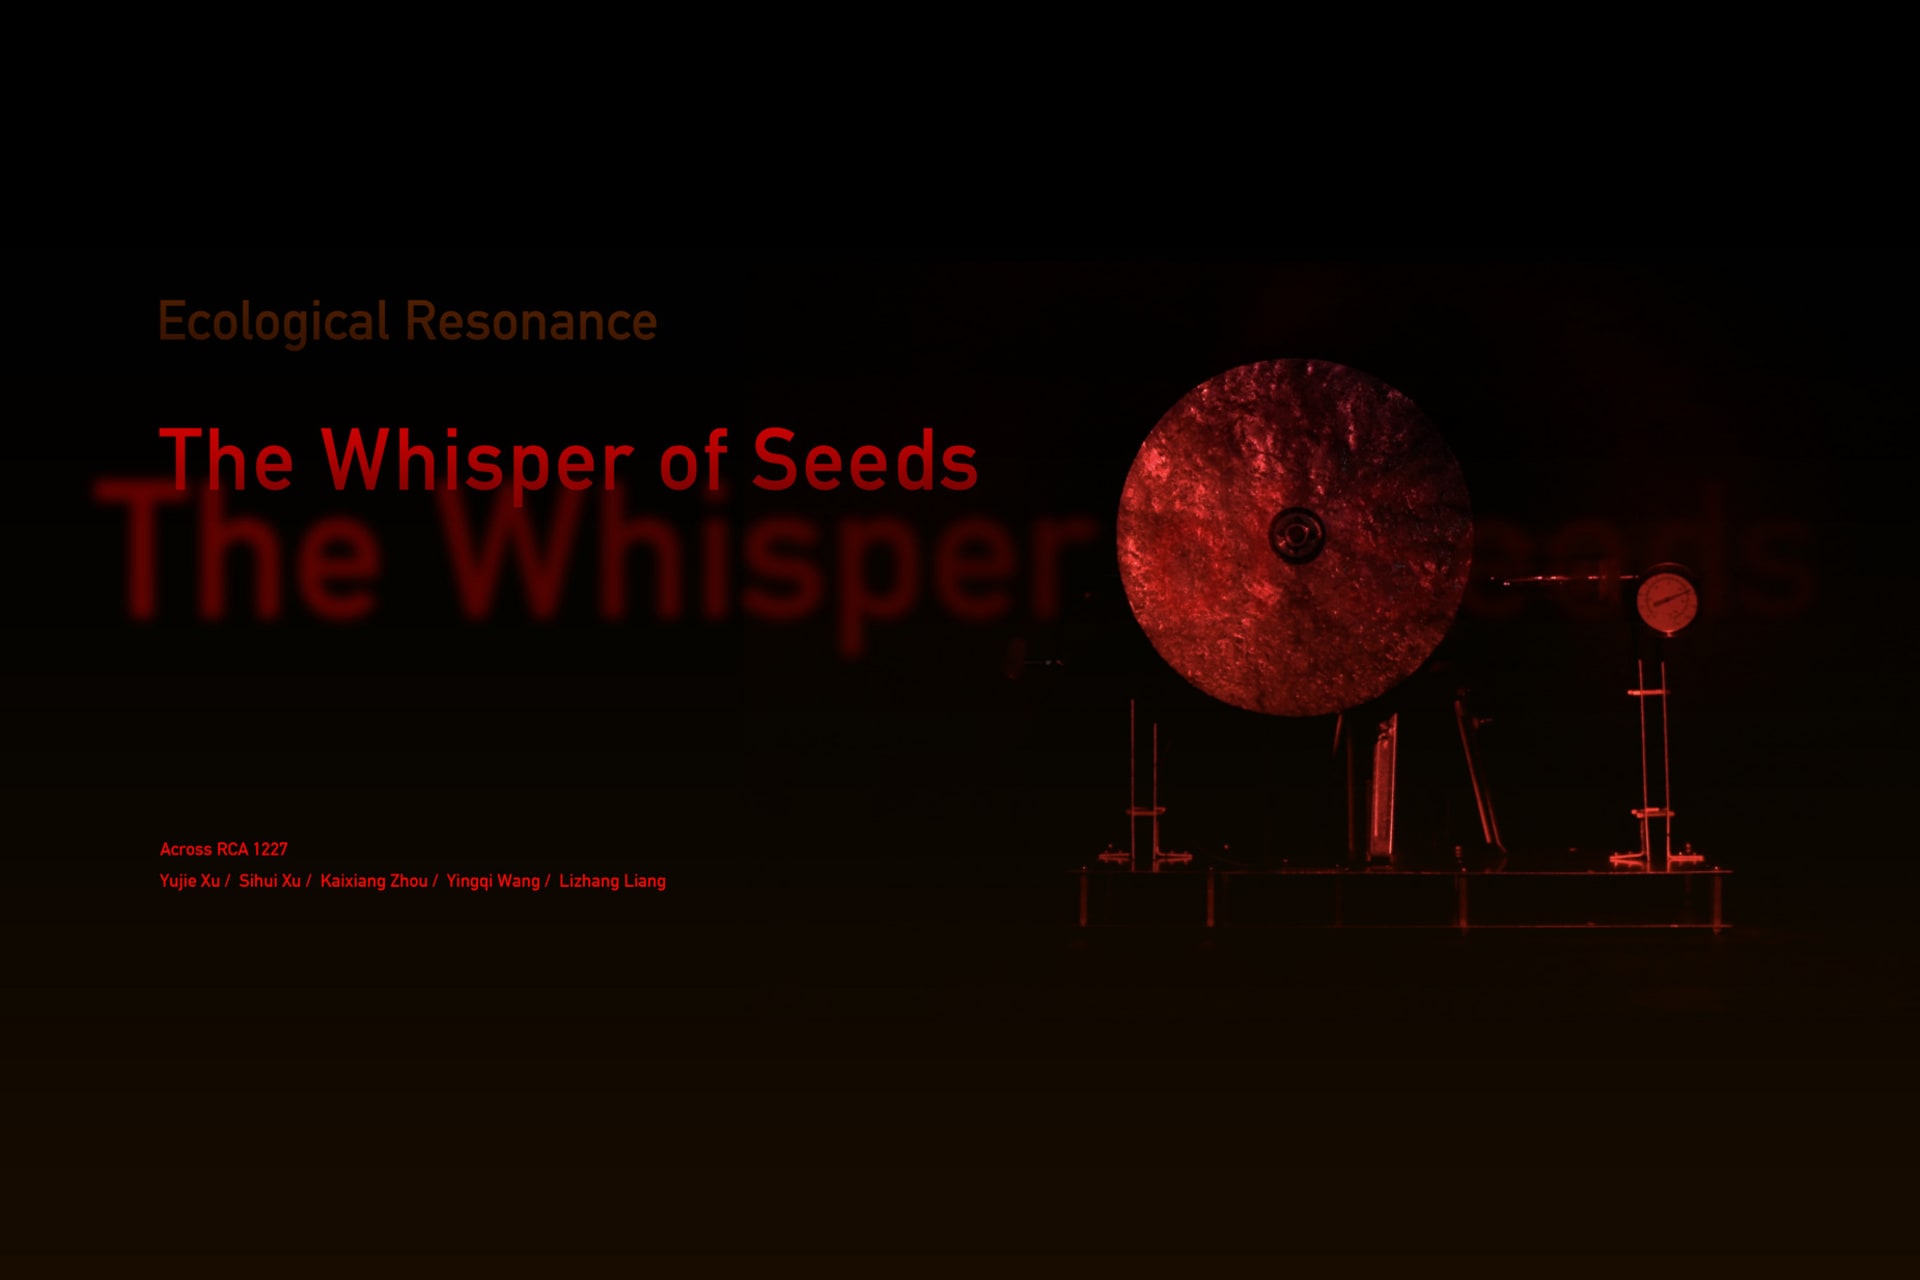 Ecological Resonance - The Whisper of Seeds